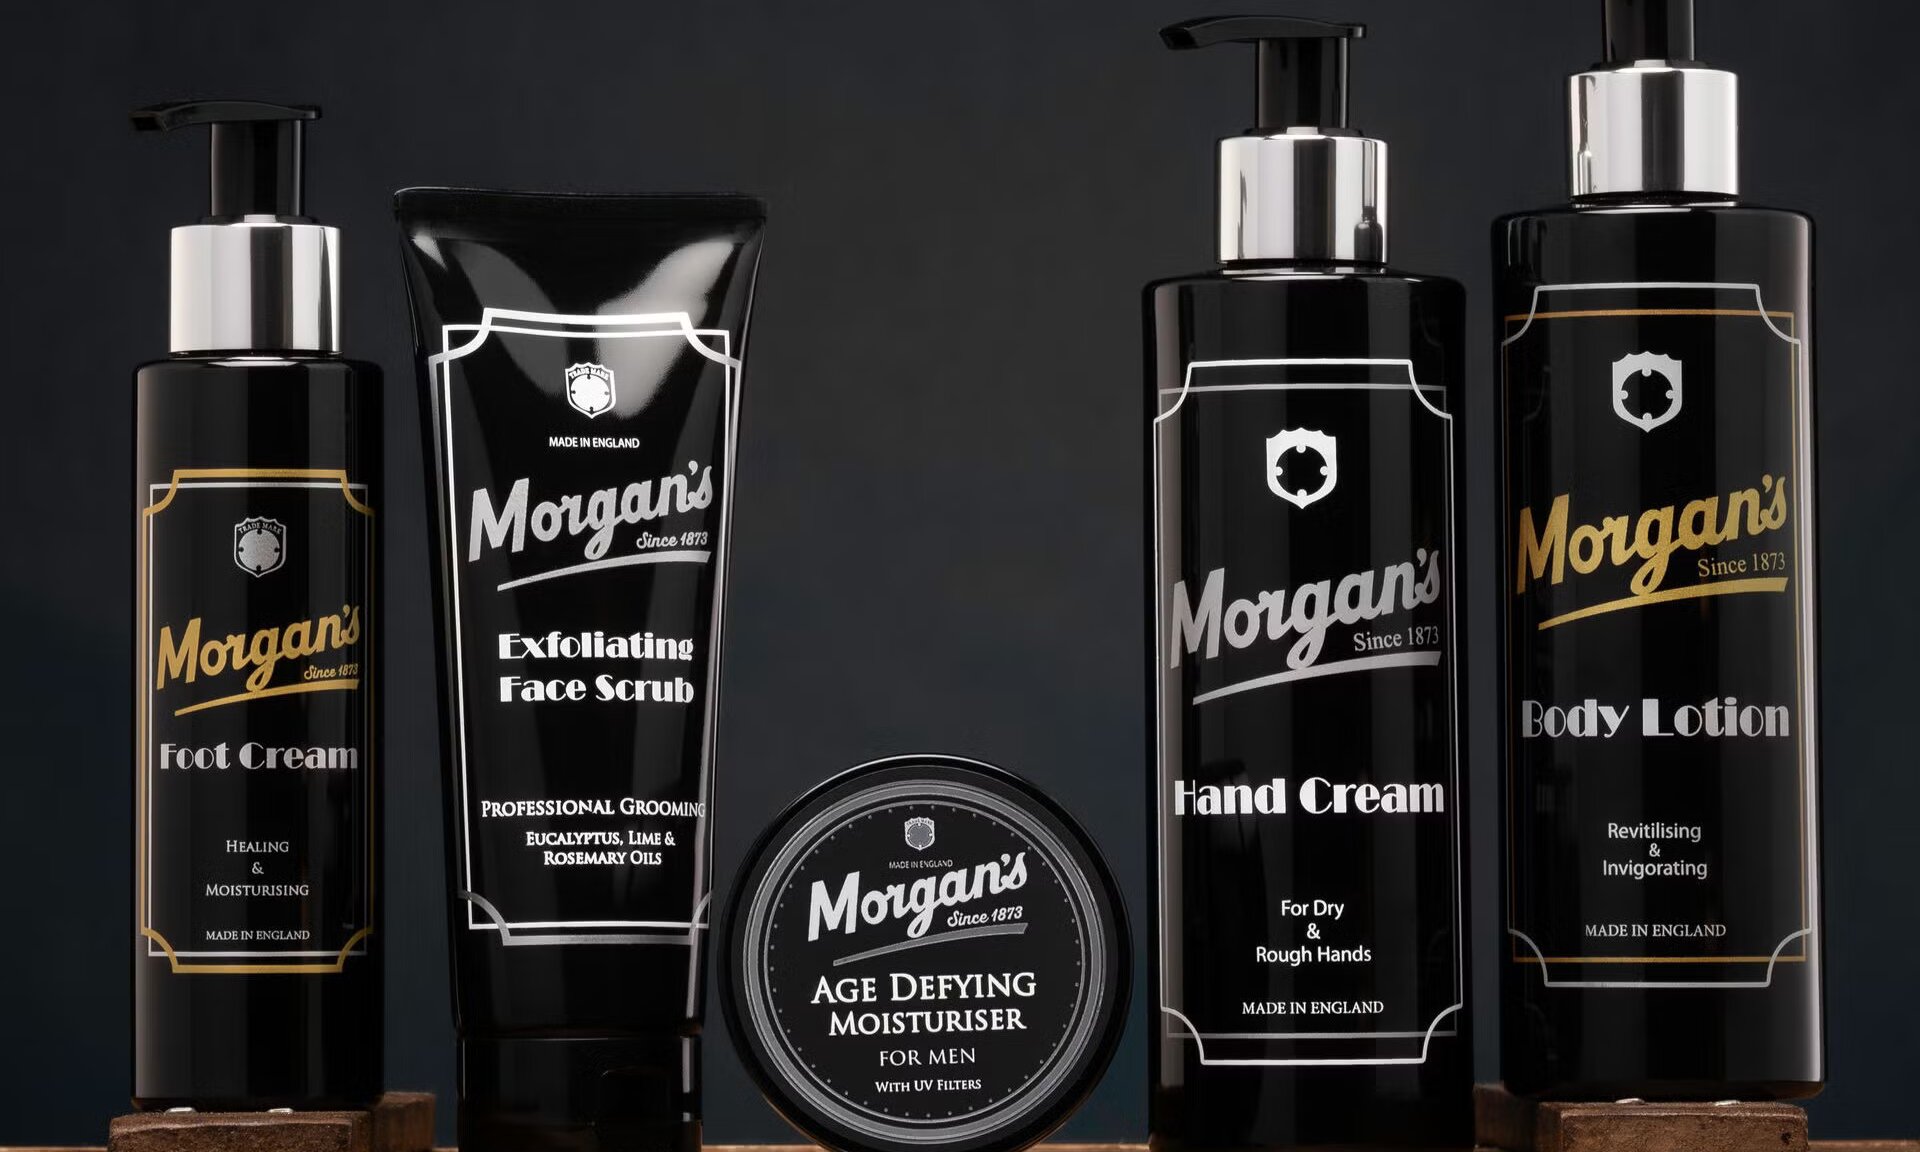 Close-up image of natural ingredients used in Morgan's grooming products